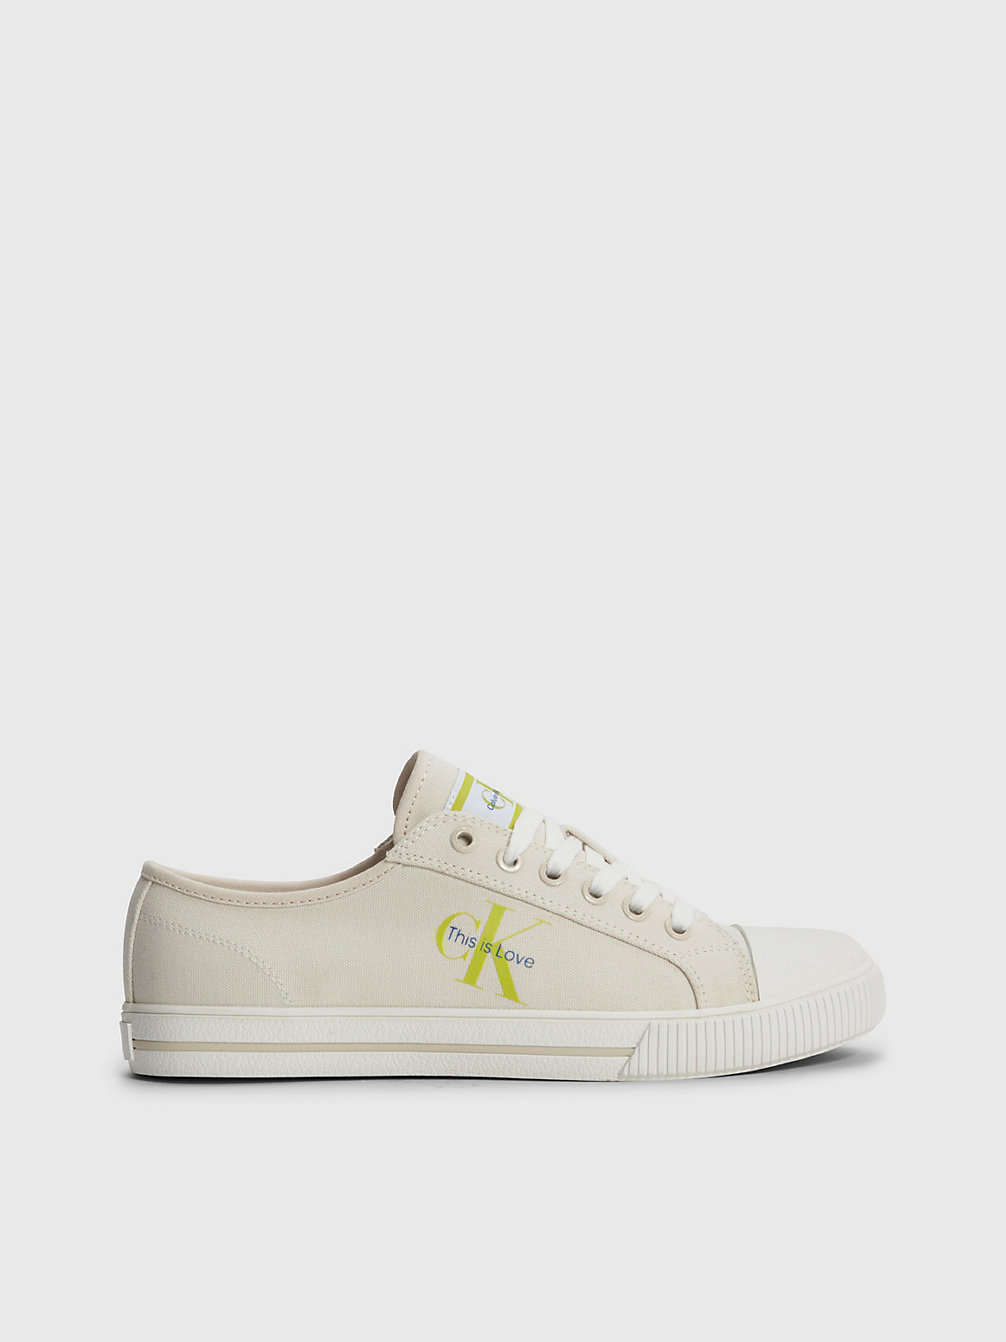 CREAMY WHITE Recycled Canvas Trainers - Pride undefined women Calvin Klein